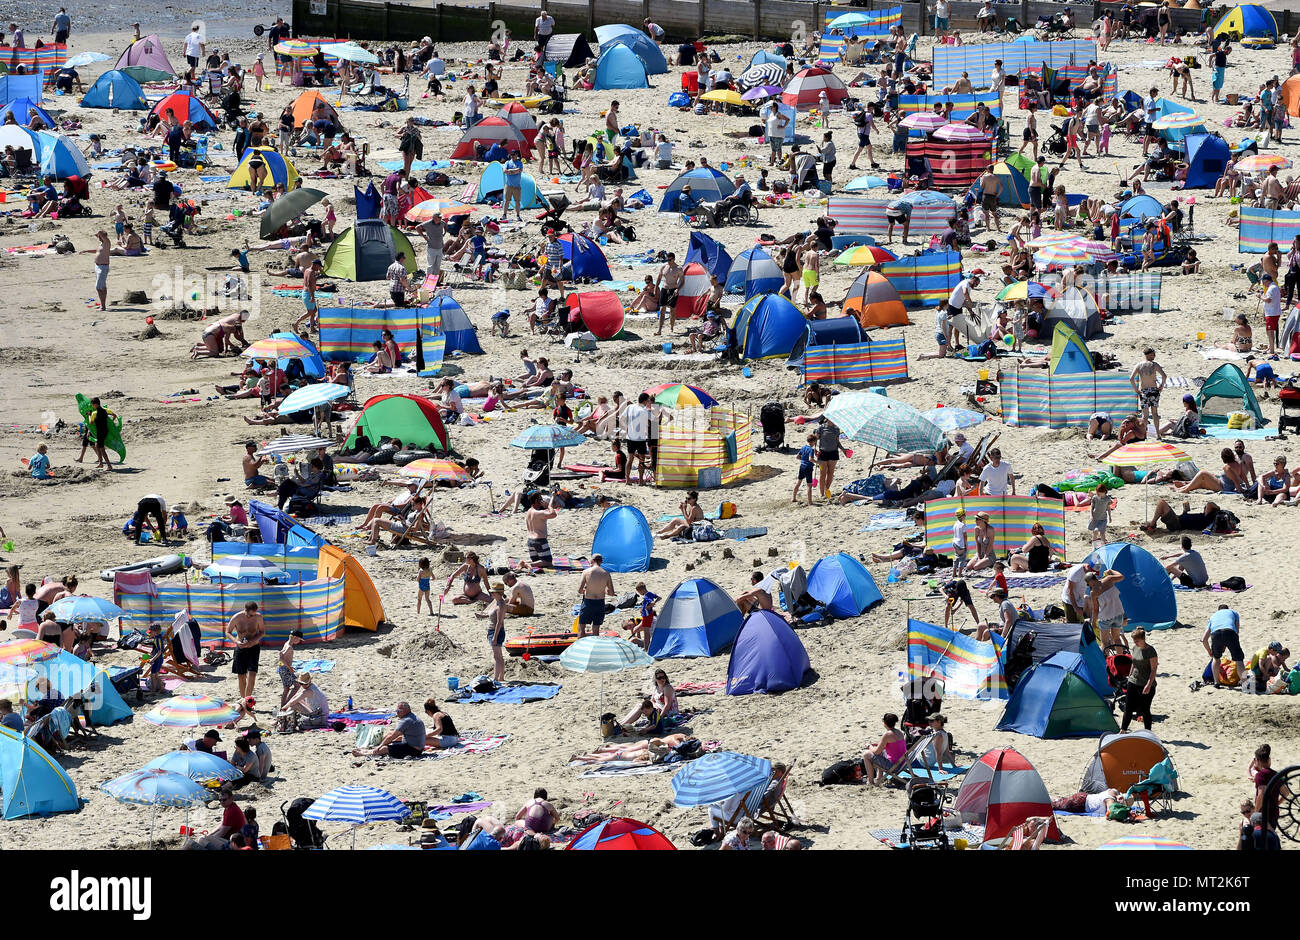 Lyme Regis, UK. 28th May 2018. Bank Holiday weather at Lyme Regis beach, Dorset. Credit: Finnbarr Webster/Alamy Live News Stock Photo